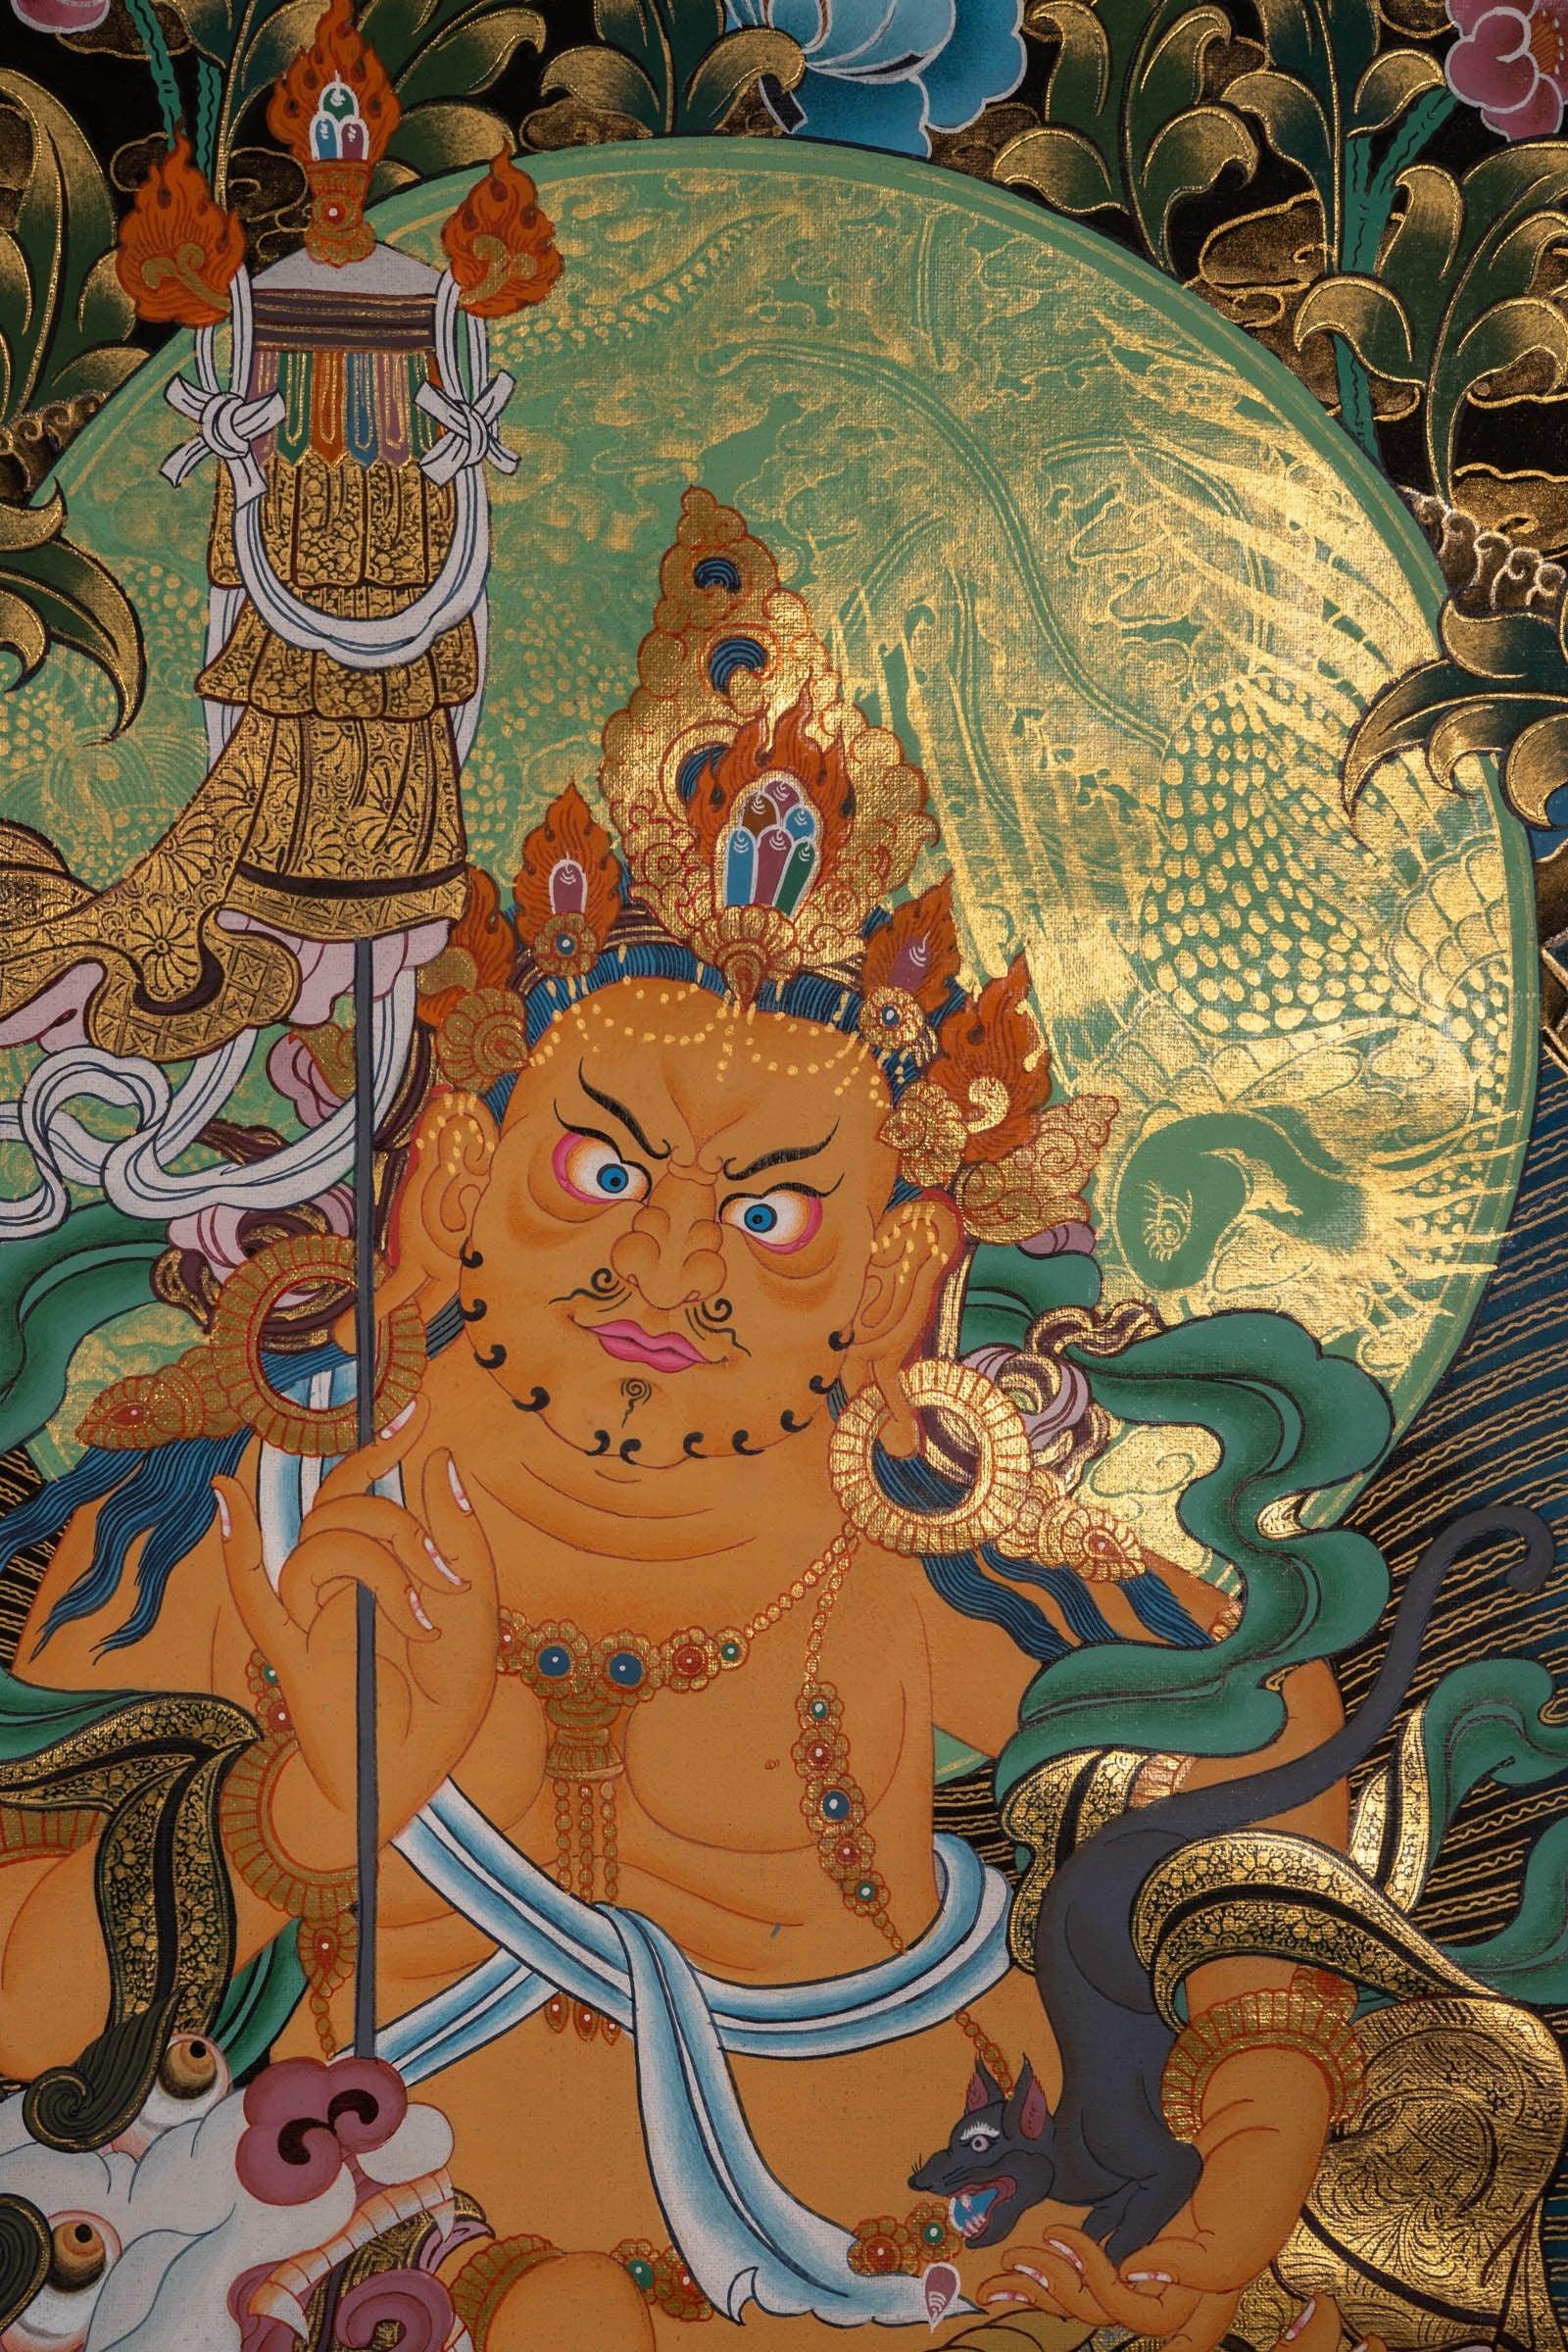 Kuber Thangka Painting For Meditational Practice and Spiritual Gifts